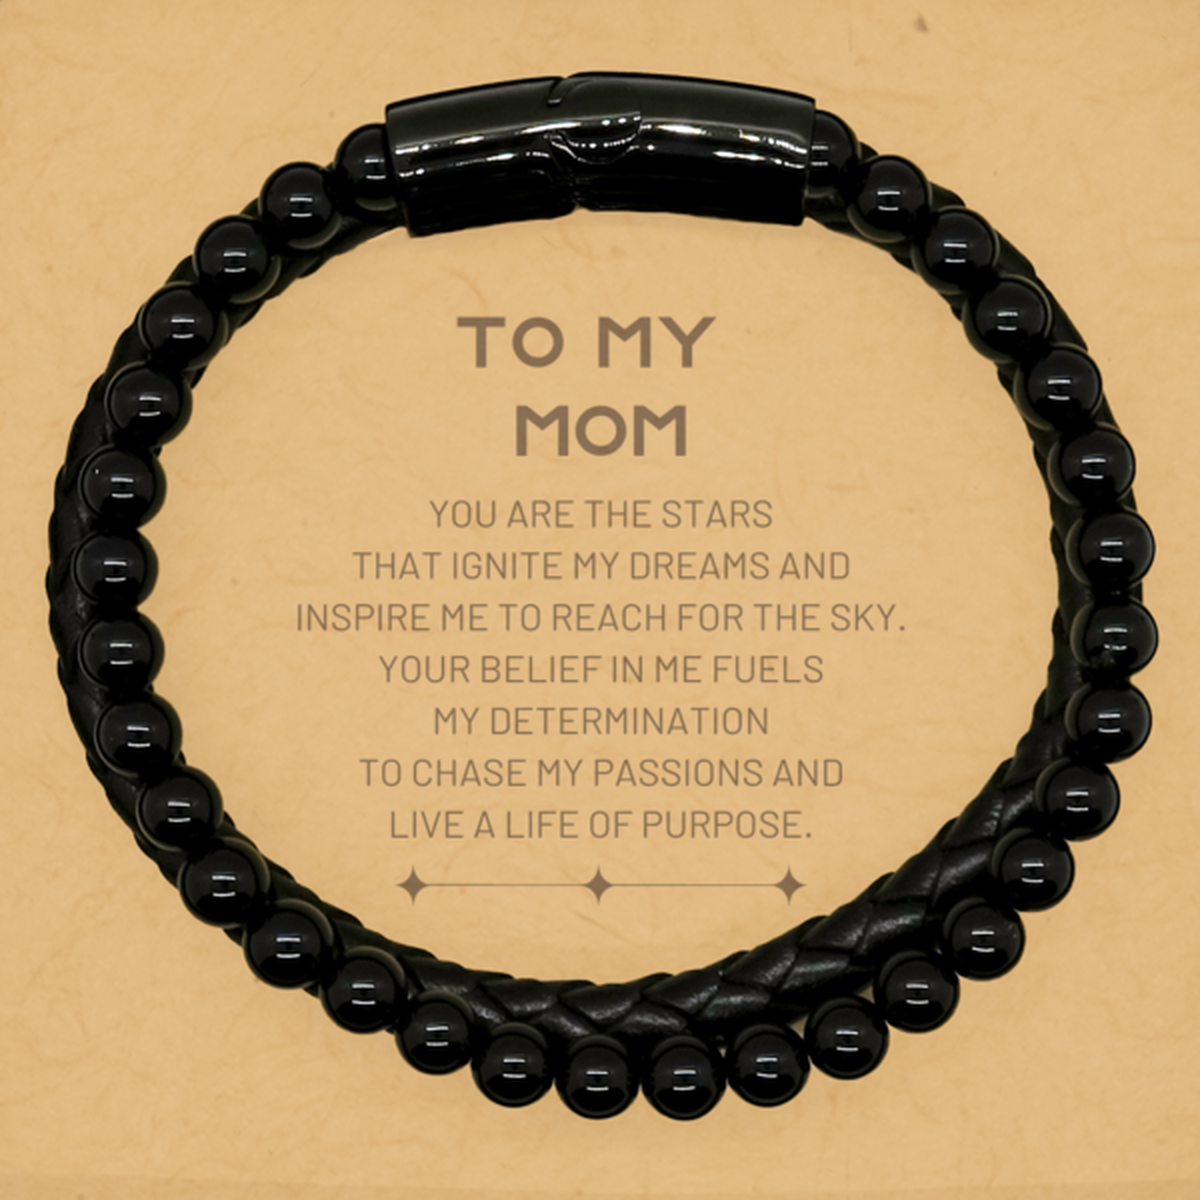 To My Mom Stone Leather Bracelets, You are the stars that ignite my dreams and inspire me to reach for the sky, Birthday Unique Gifts For Mom, Thank You Gifts For Mom